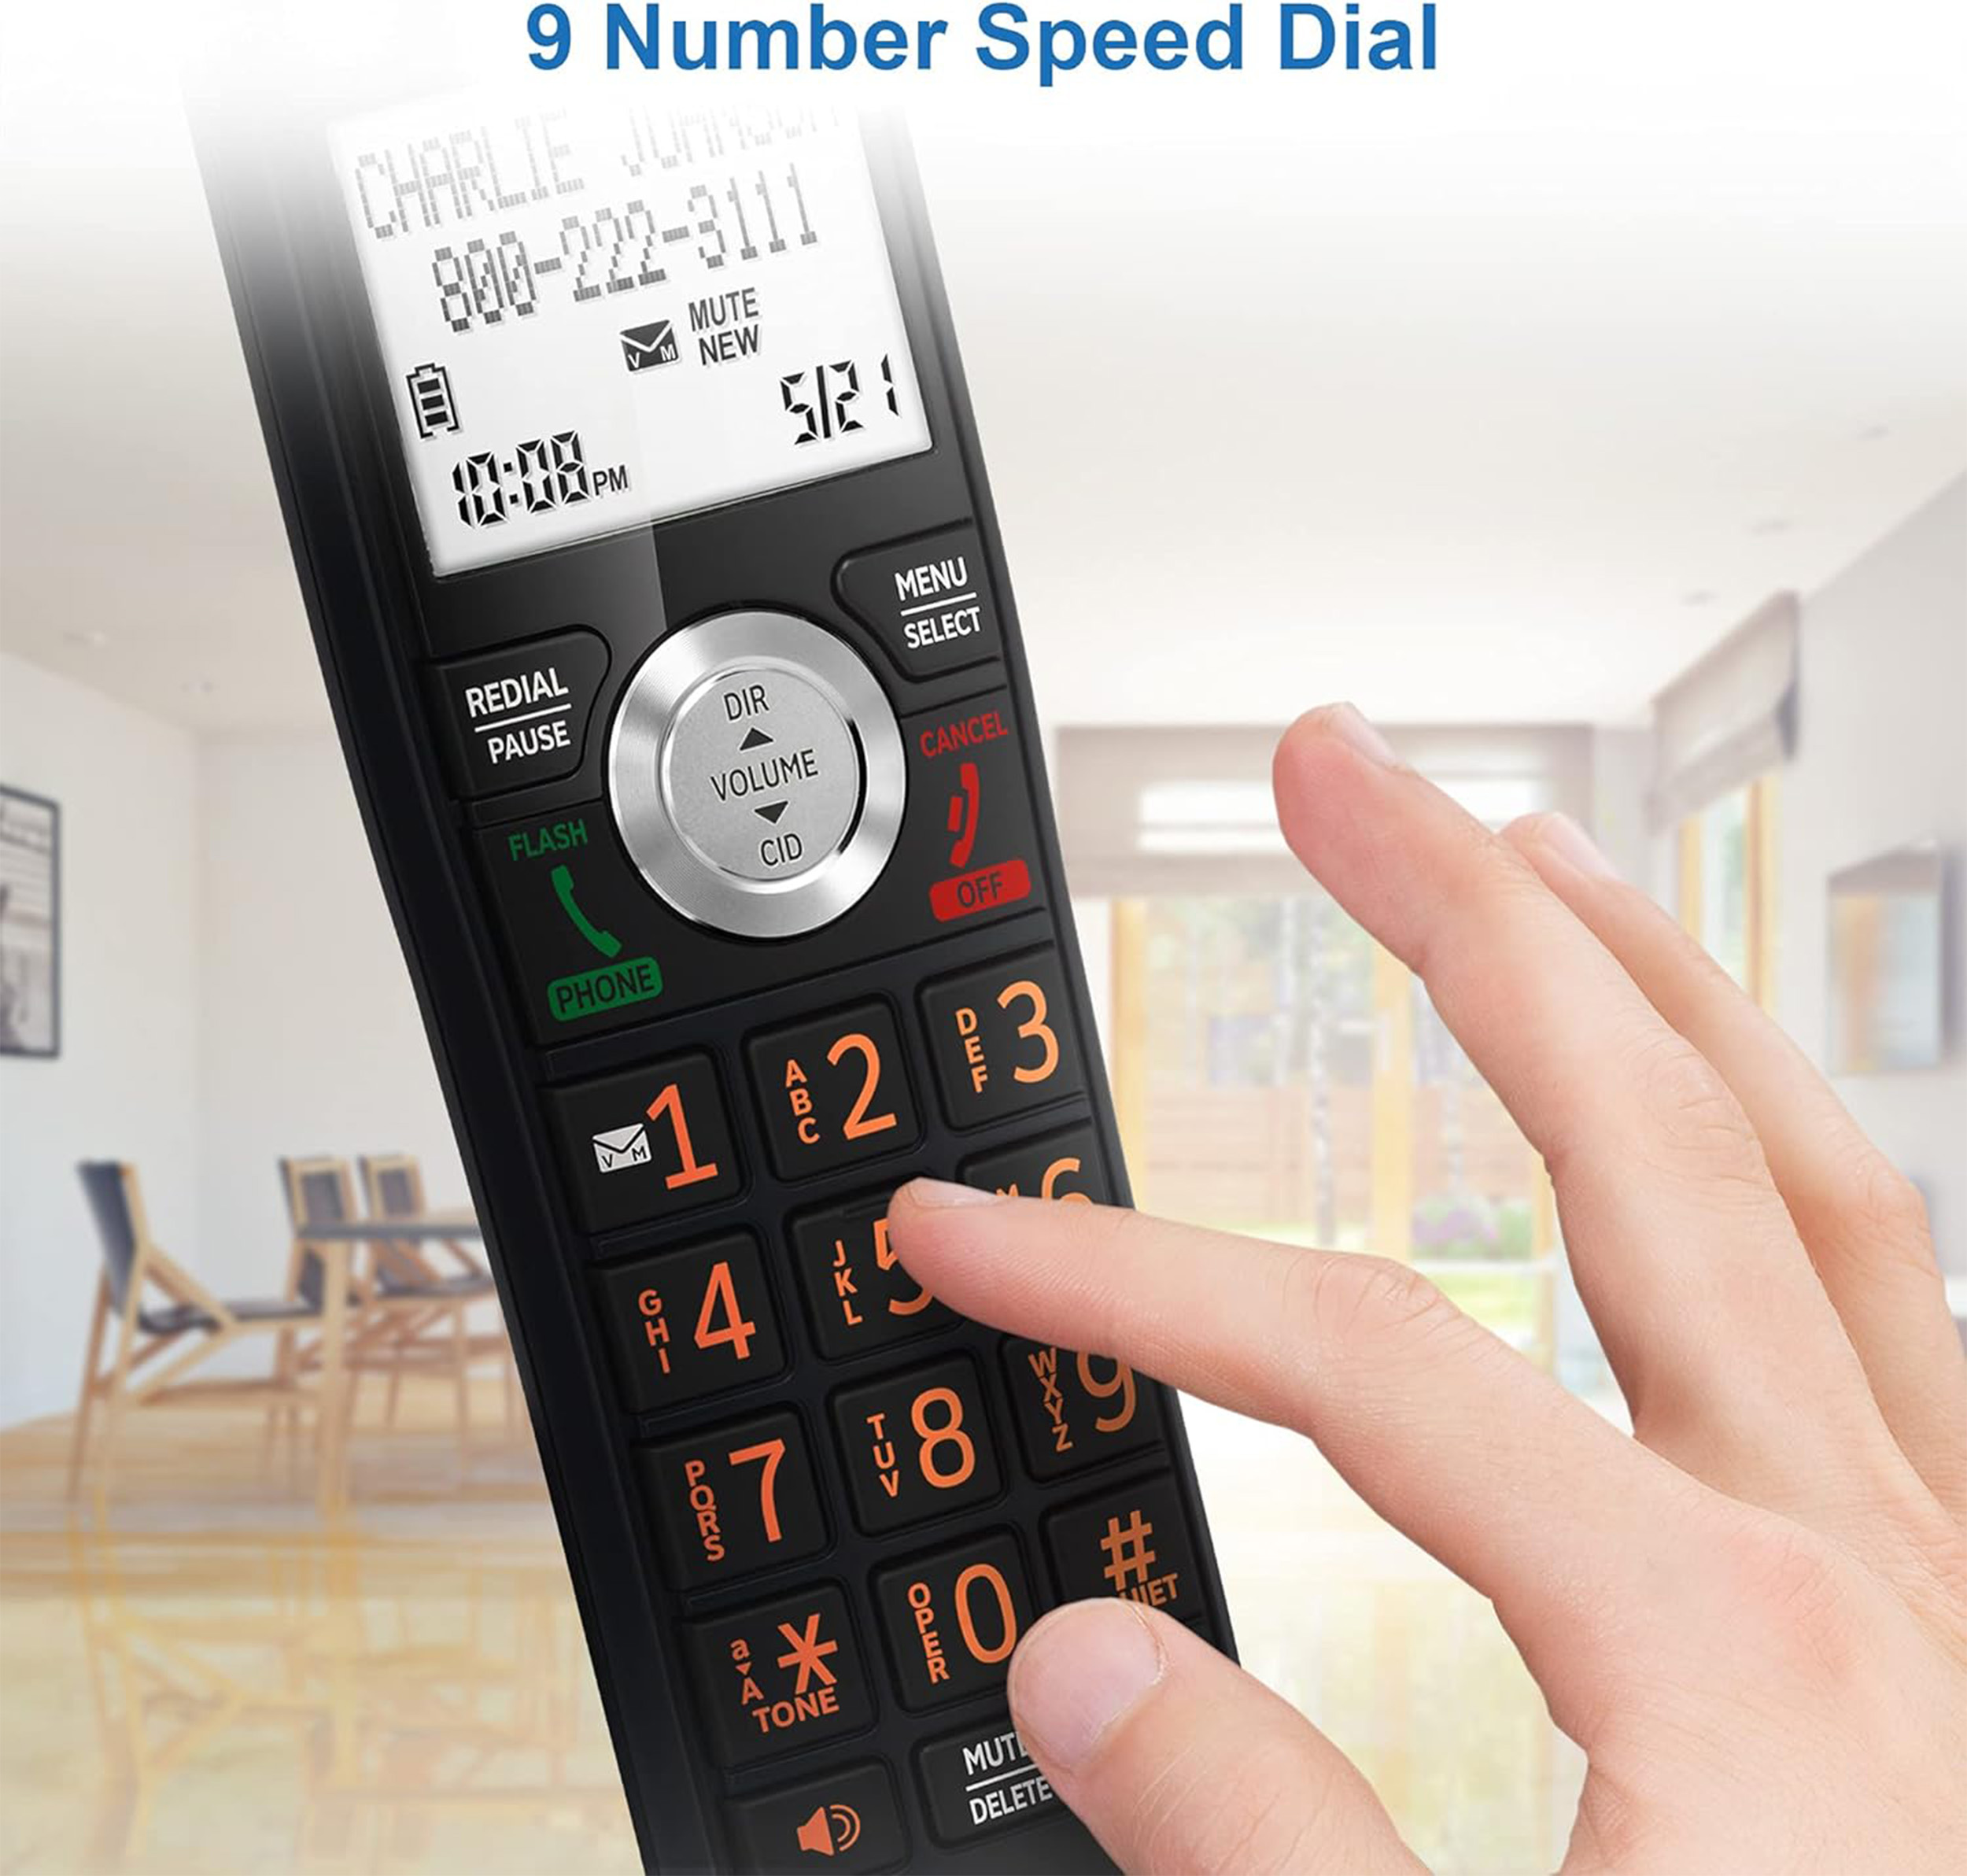 1-Handset Expandable Cordless Phone with Unsurpassed Range, Smart Call Blocker and Answering System - view 9